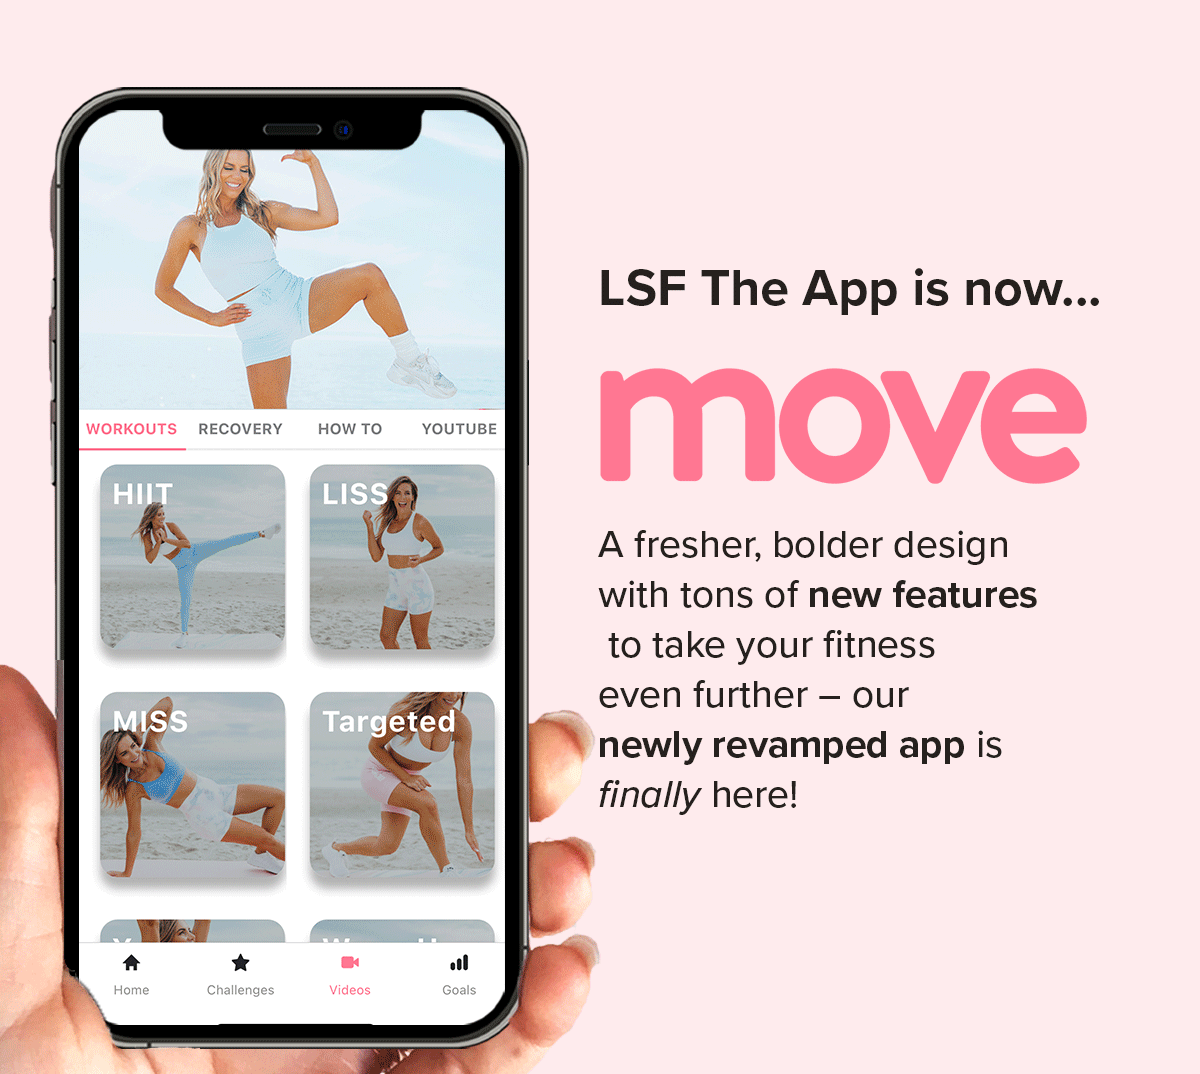 LSF the App is now MOVE.